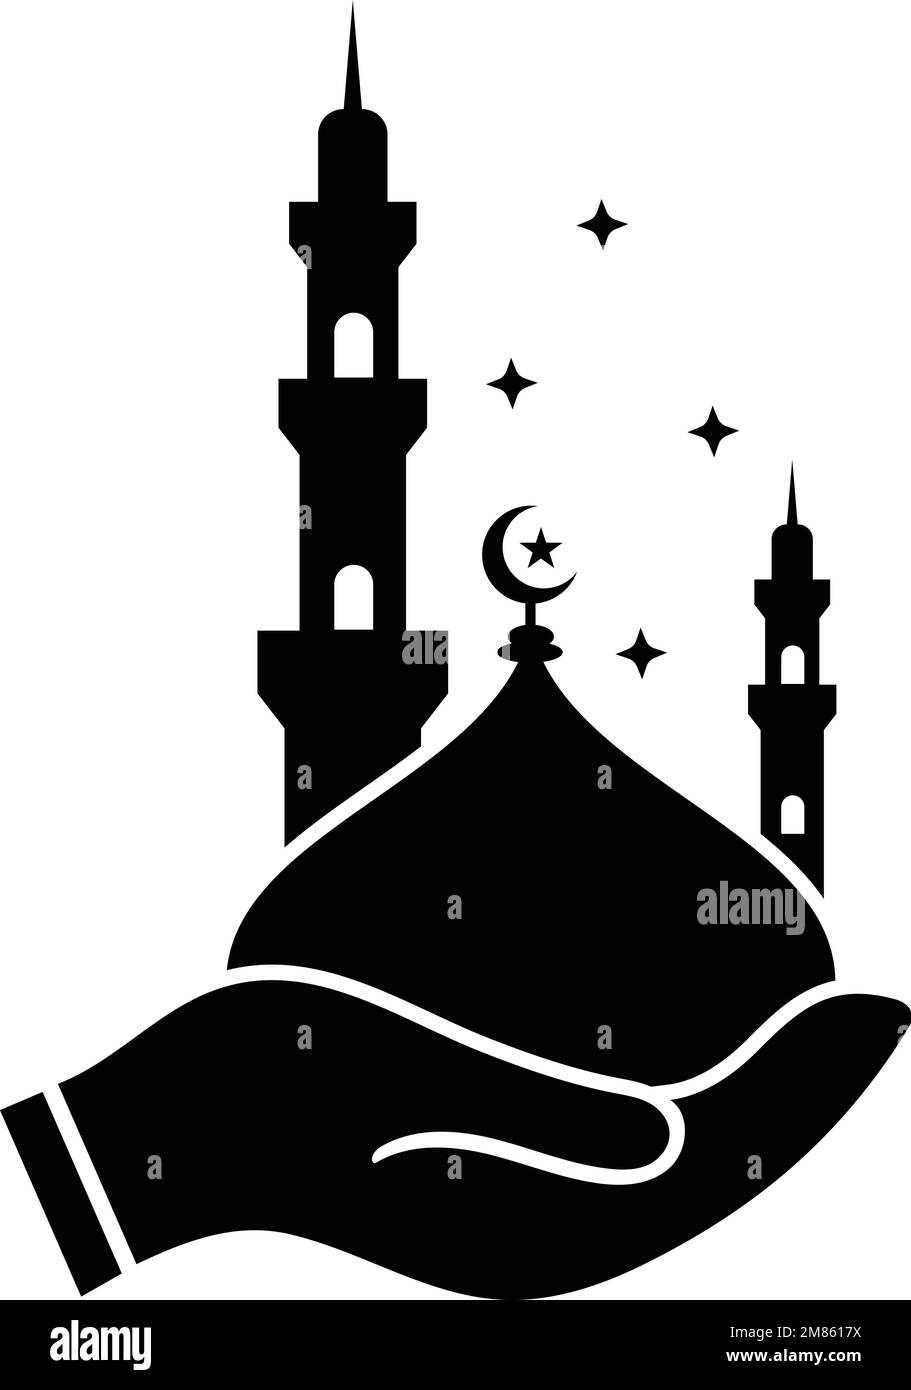 silhouette of mosque, luxury design. One hand holding Mosque dome with minar and stars. Islamic festival related design. Stock Vector